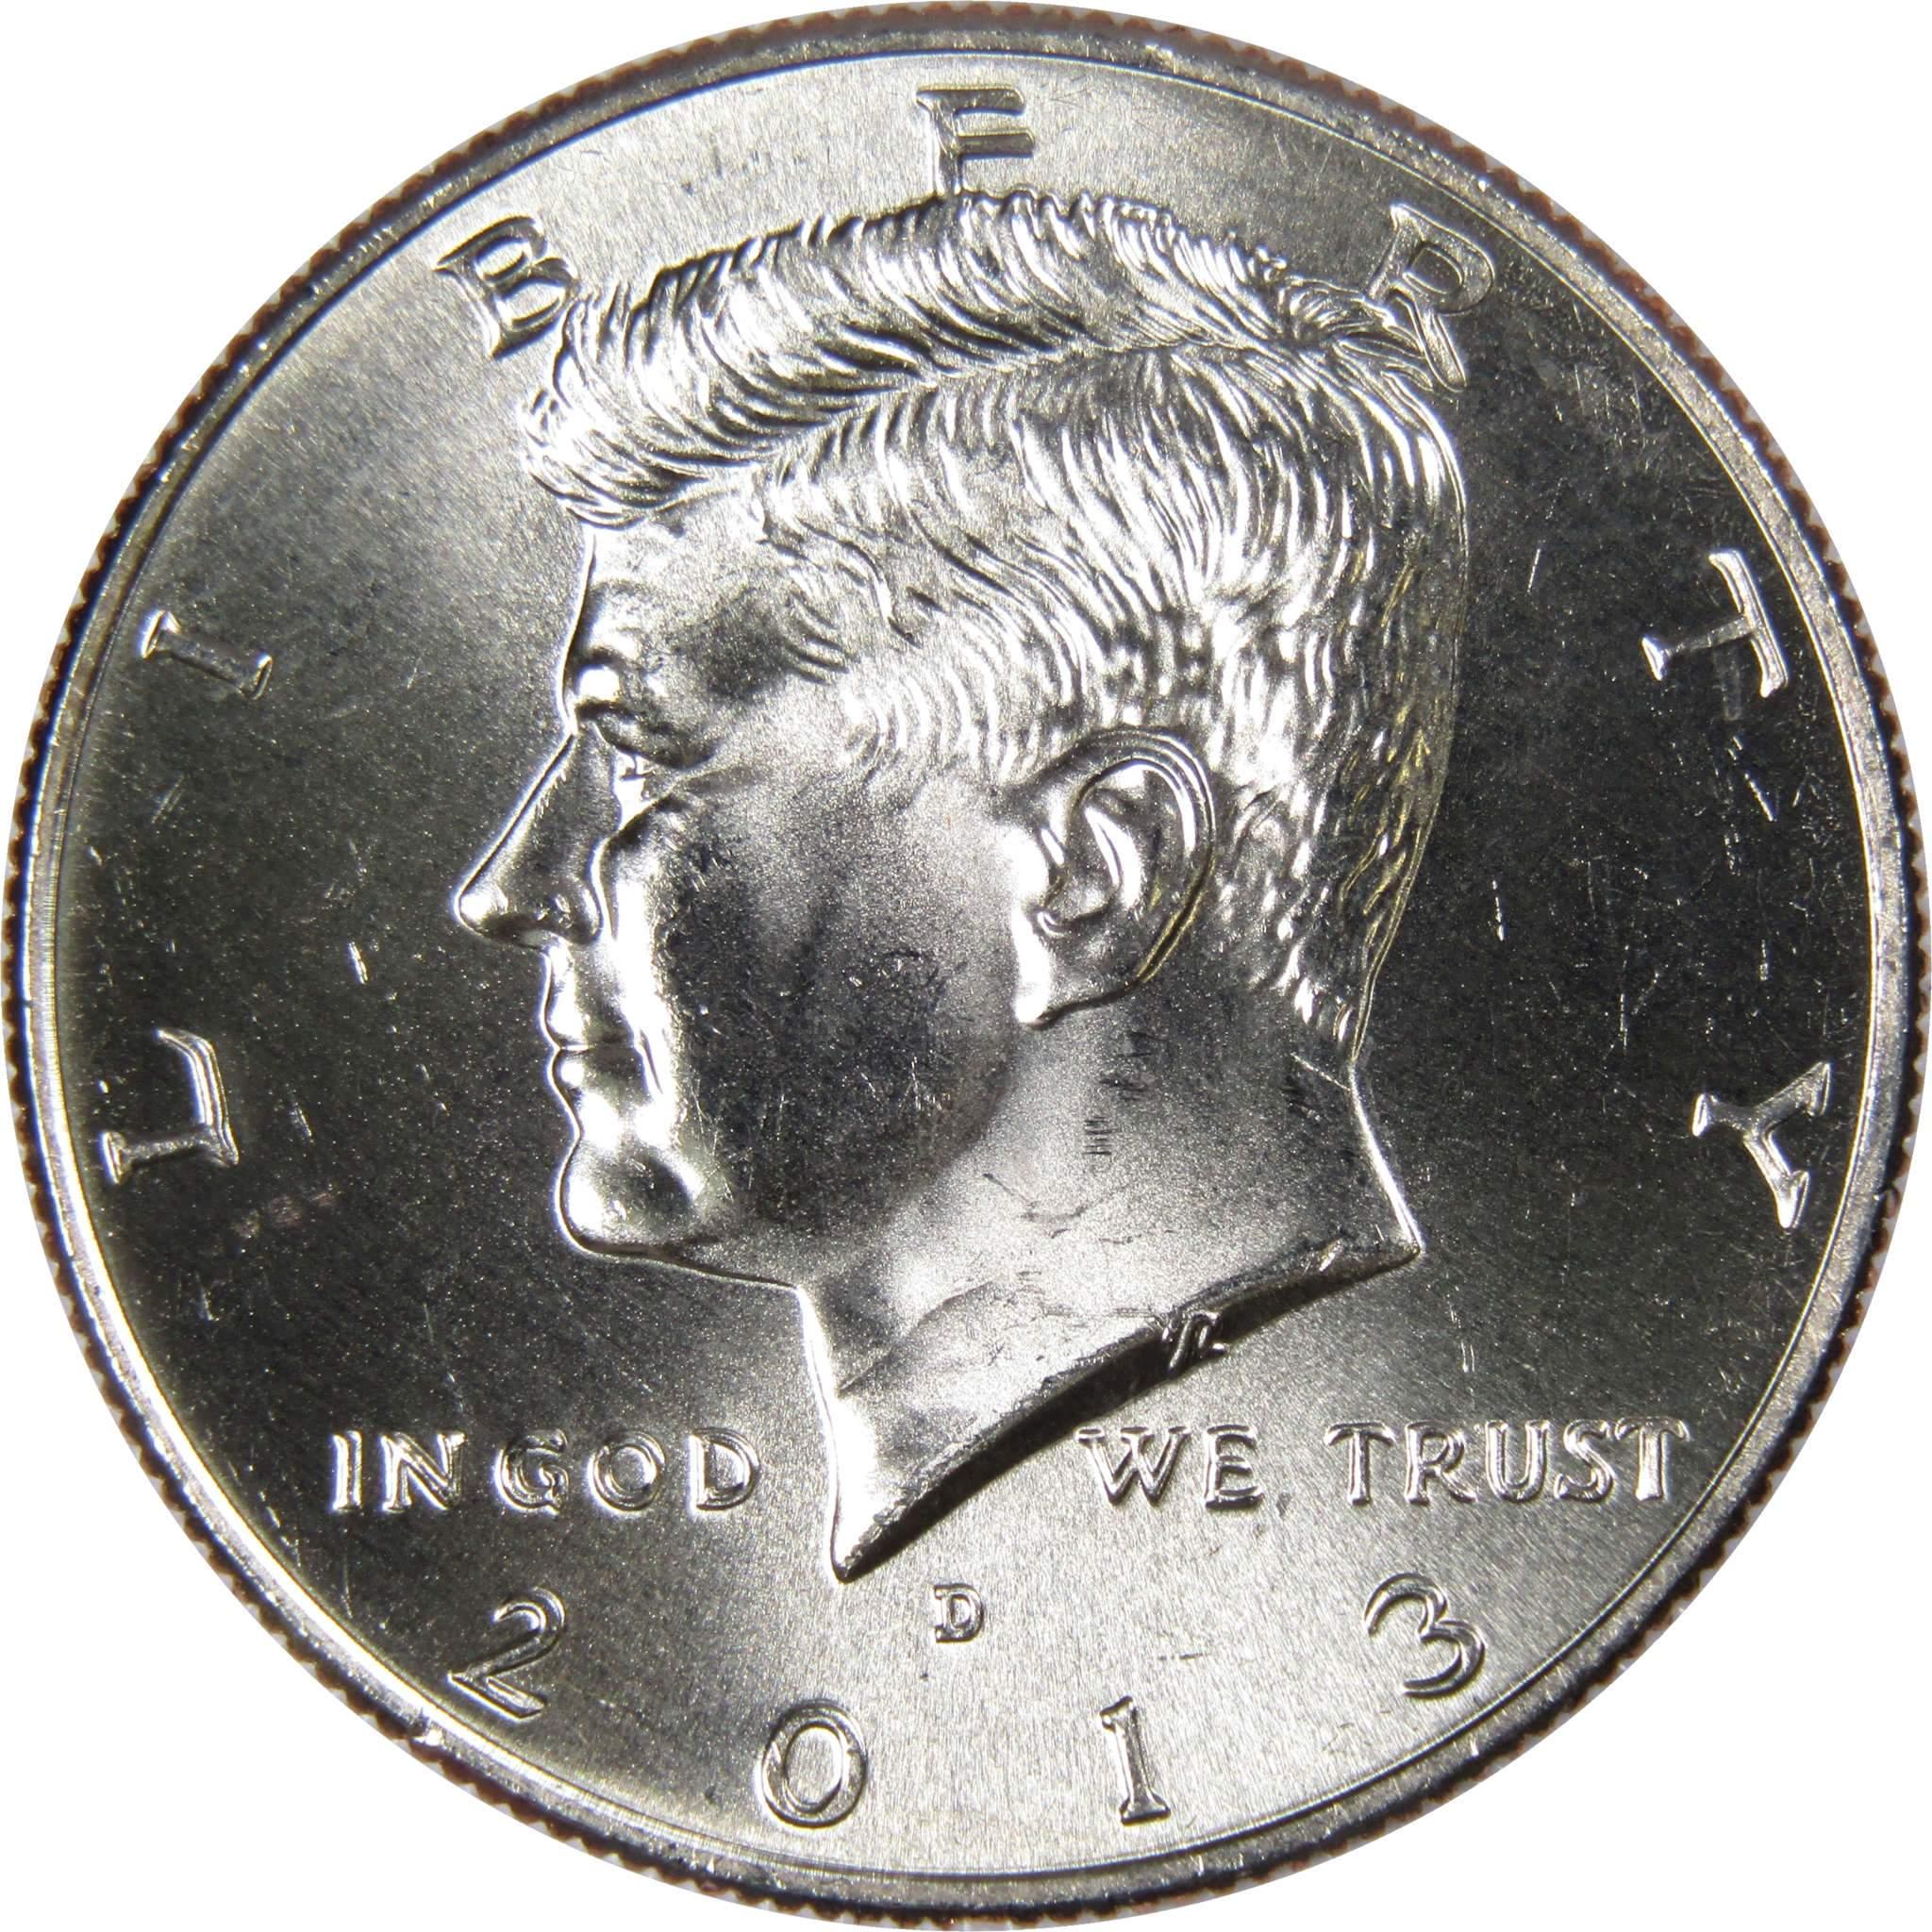 2013 D Kennedy Half Dollar BU Uncirculated Mint State 50c US Coin Collectible